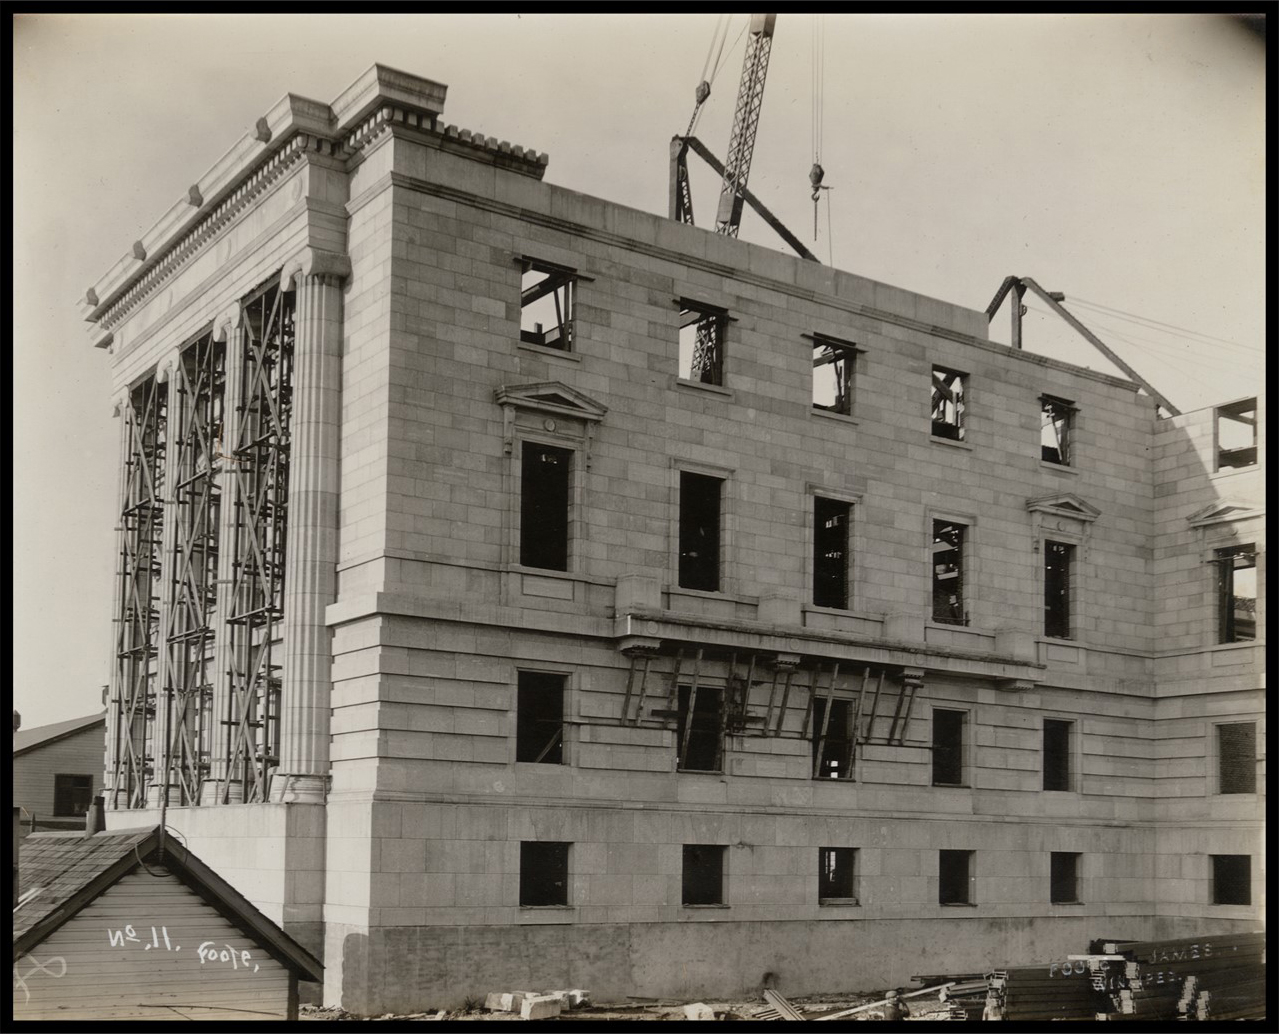 Photo of the exterior of the southeast part of the building. The walls are almost complete, but there is no roof nor windows. There is scaffolding in between the stone columns.